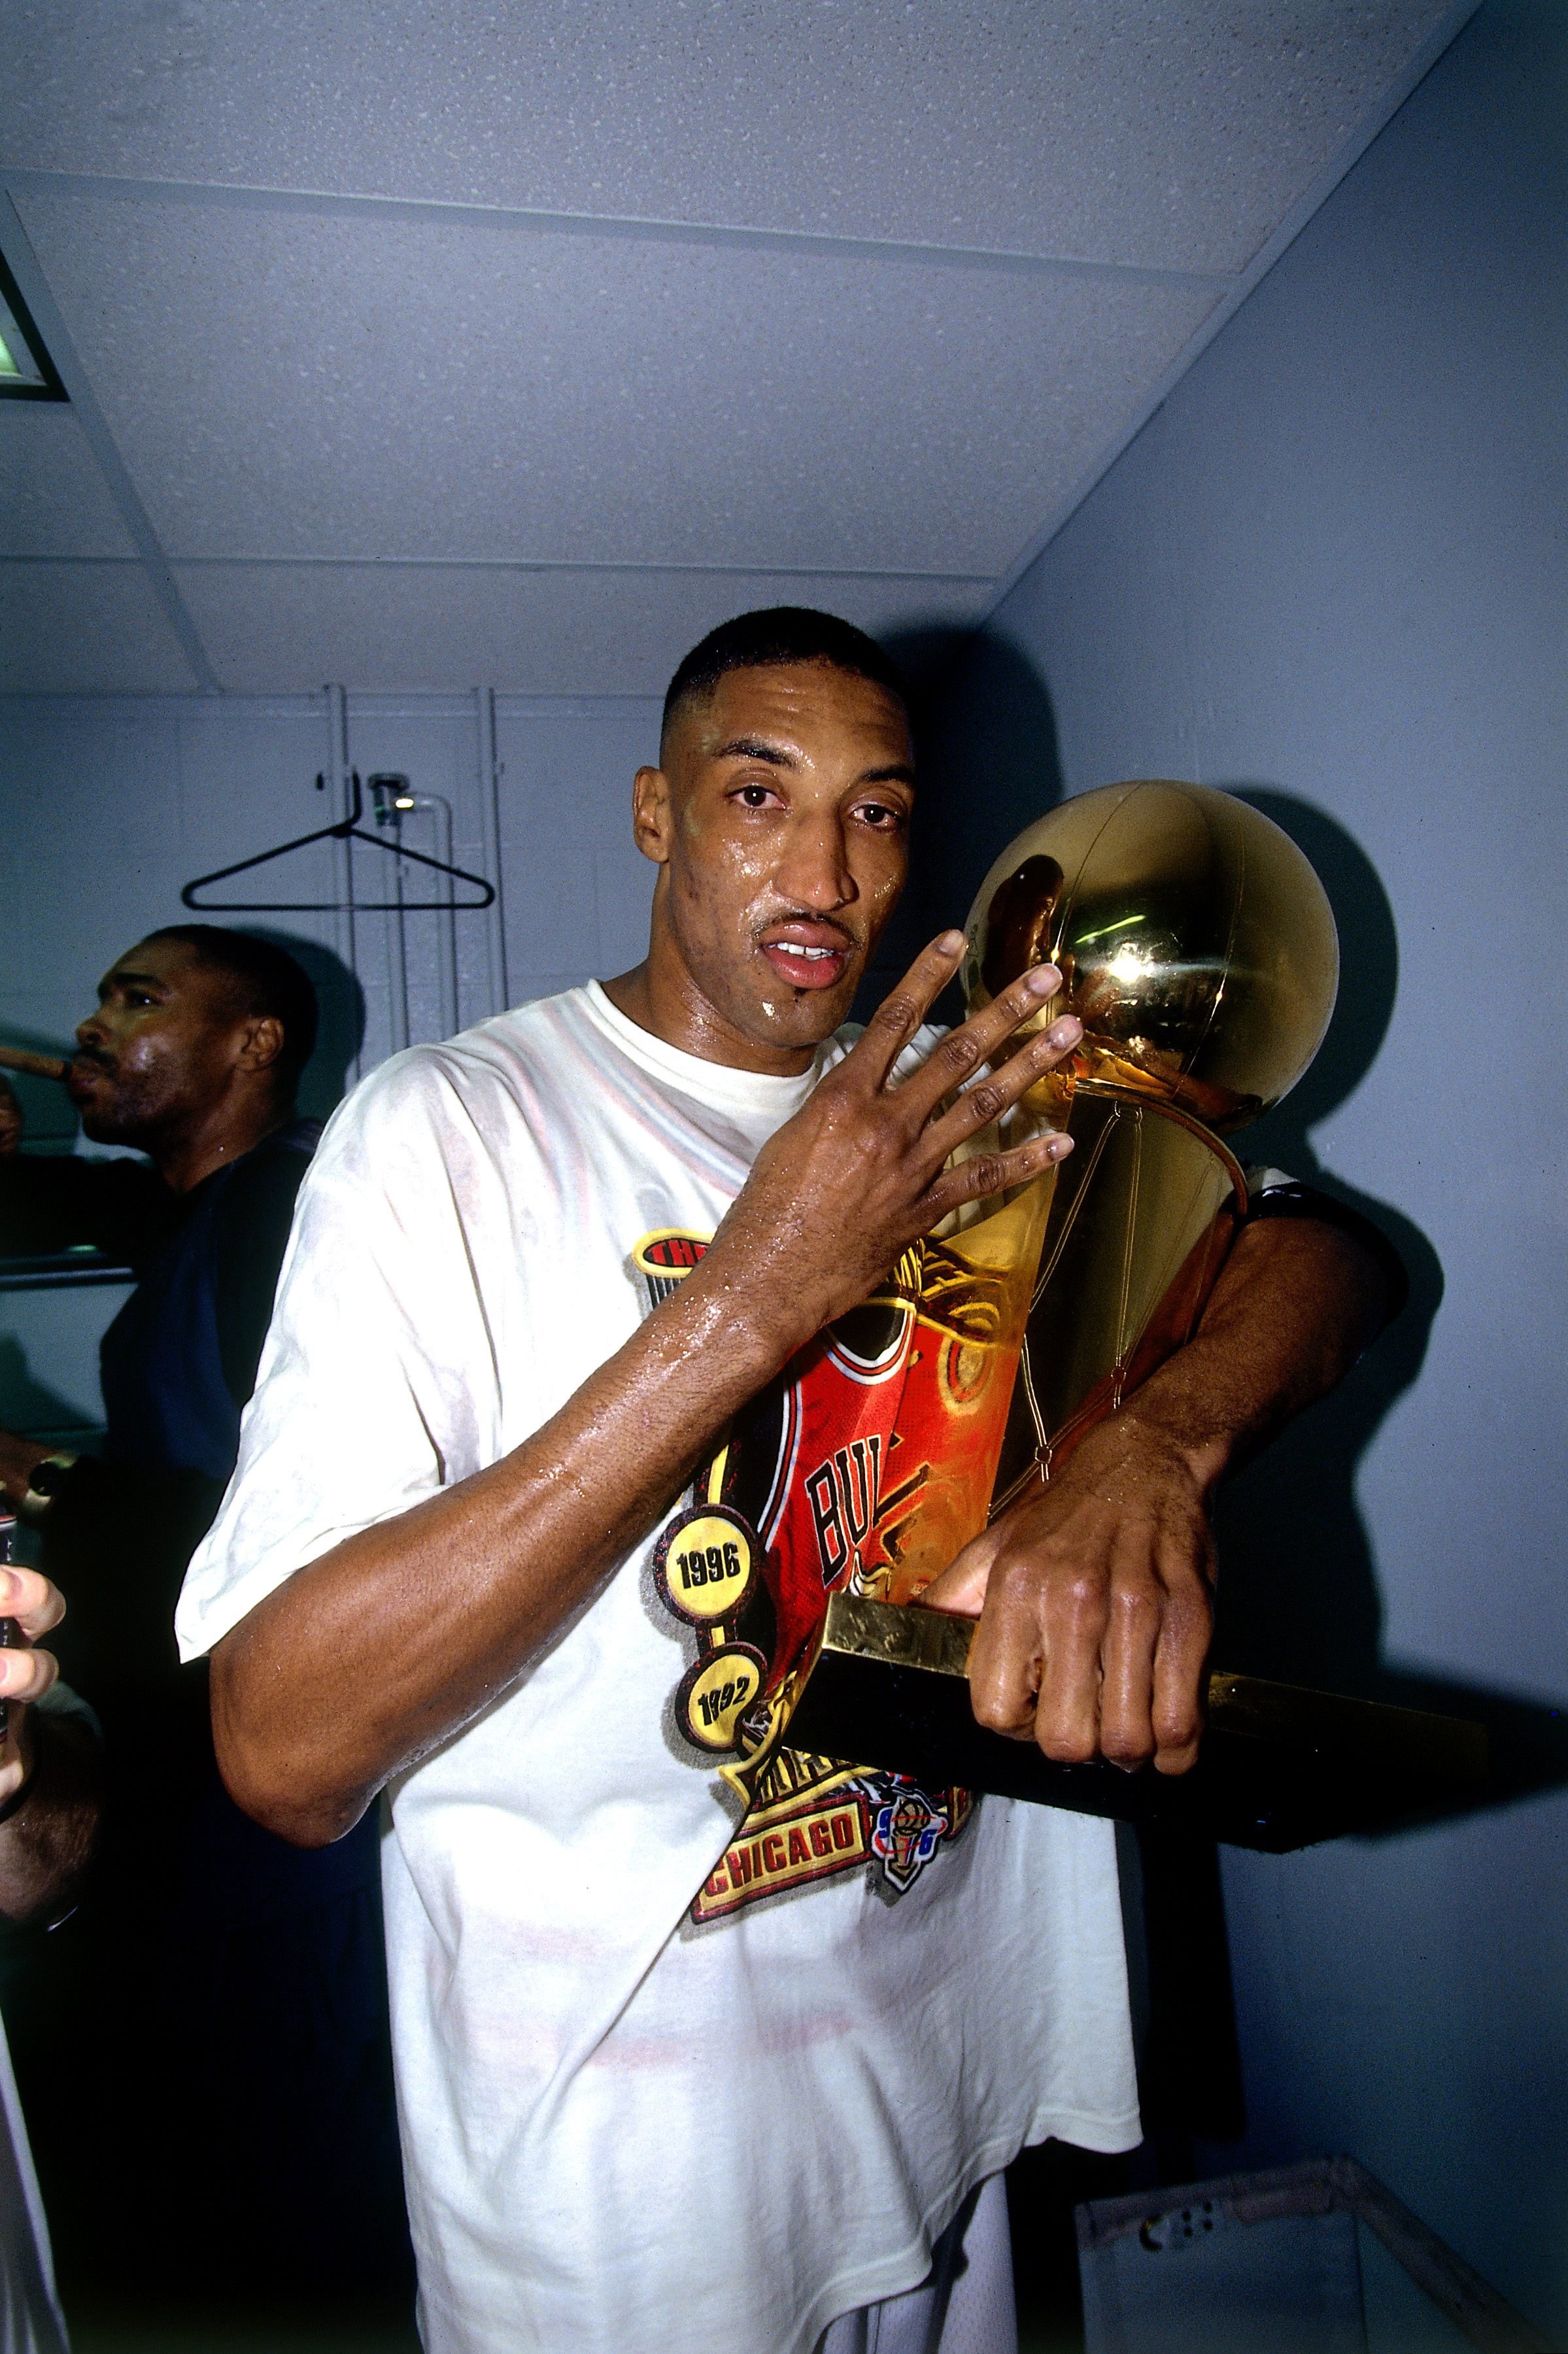 CHICAGO - JUNE 16:  Scottie Pippen #33 of the Chicago Bulls celebrates with the Larry O'Brien trophy after defeating the Seattle SuperSonics in Game Six of the 1996 NBA Finals at the United Center on June 16, 1996 in Chicago Iillinois.  The Bulls won 87-75. NOTE TO USER: User expressly acknowledges that, by downloading and or using this photograph, User is consenting to the terms and conditions of the Getty Images License agreement. Mandatory Copyright Notice: Copyright 1996 NBAE (Photo by Andre